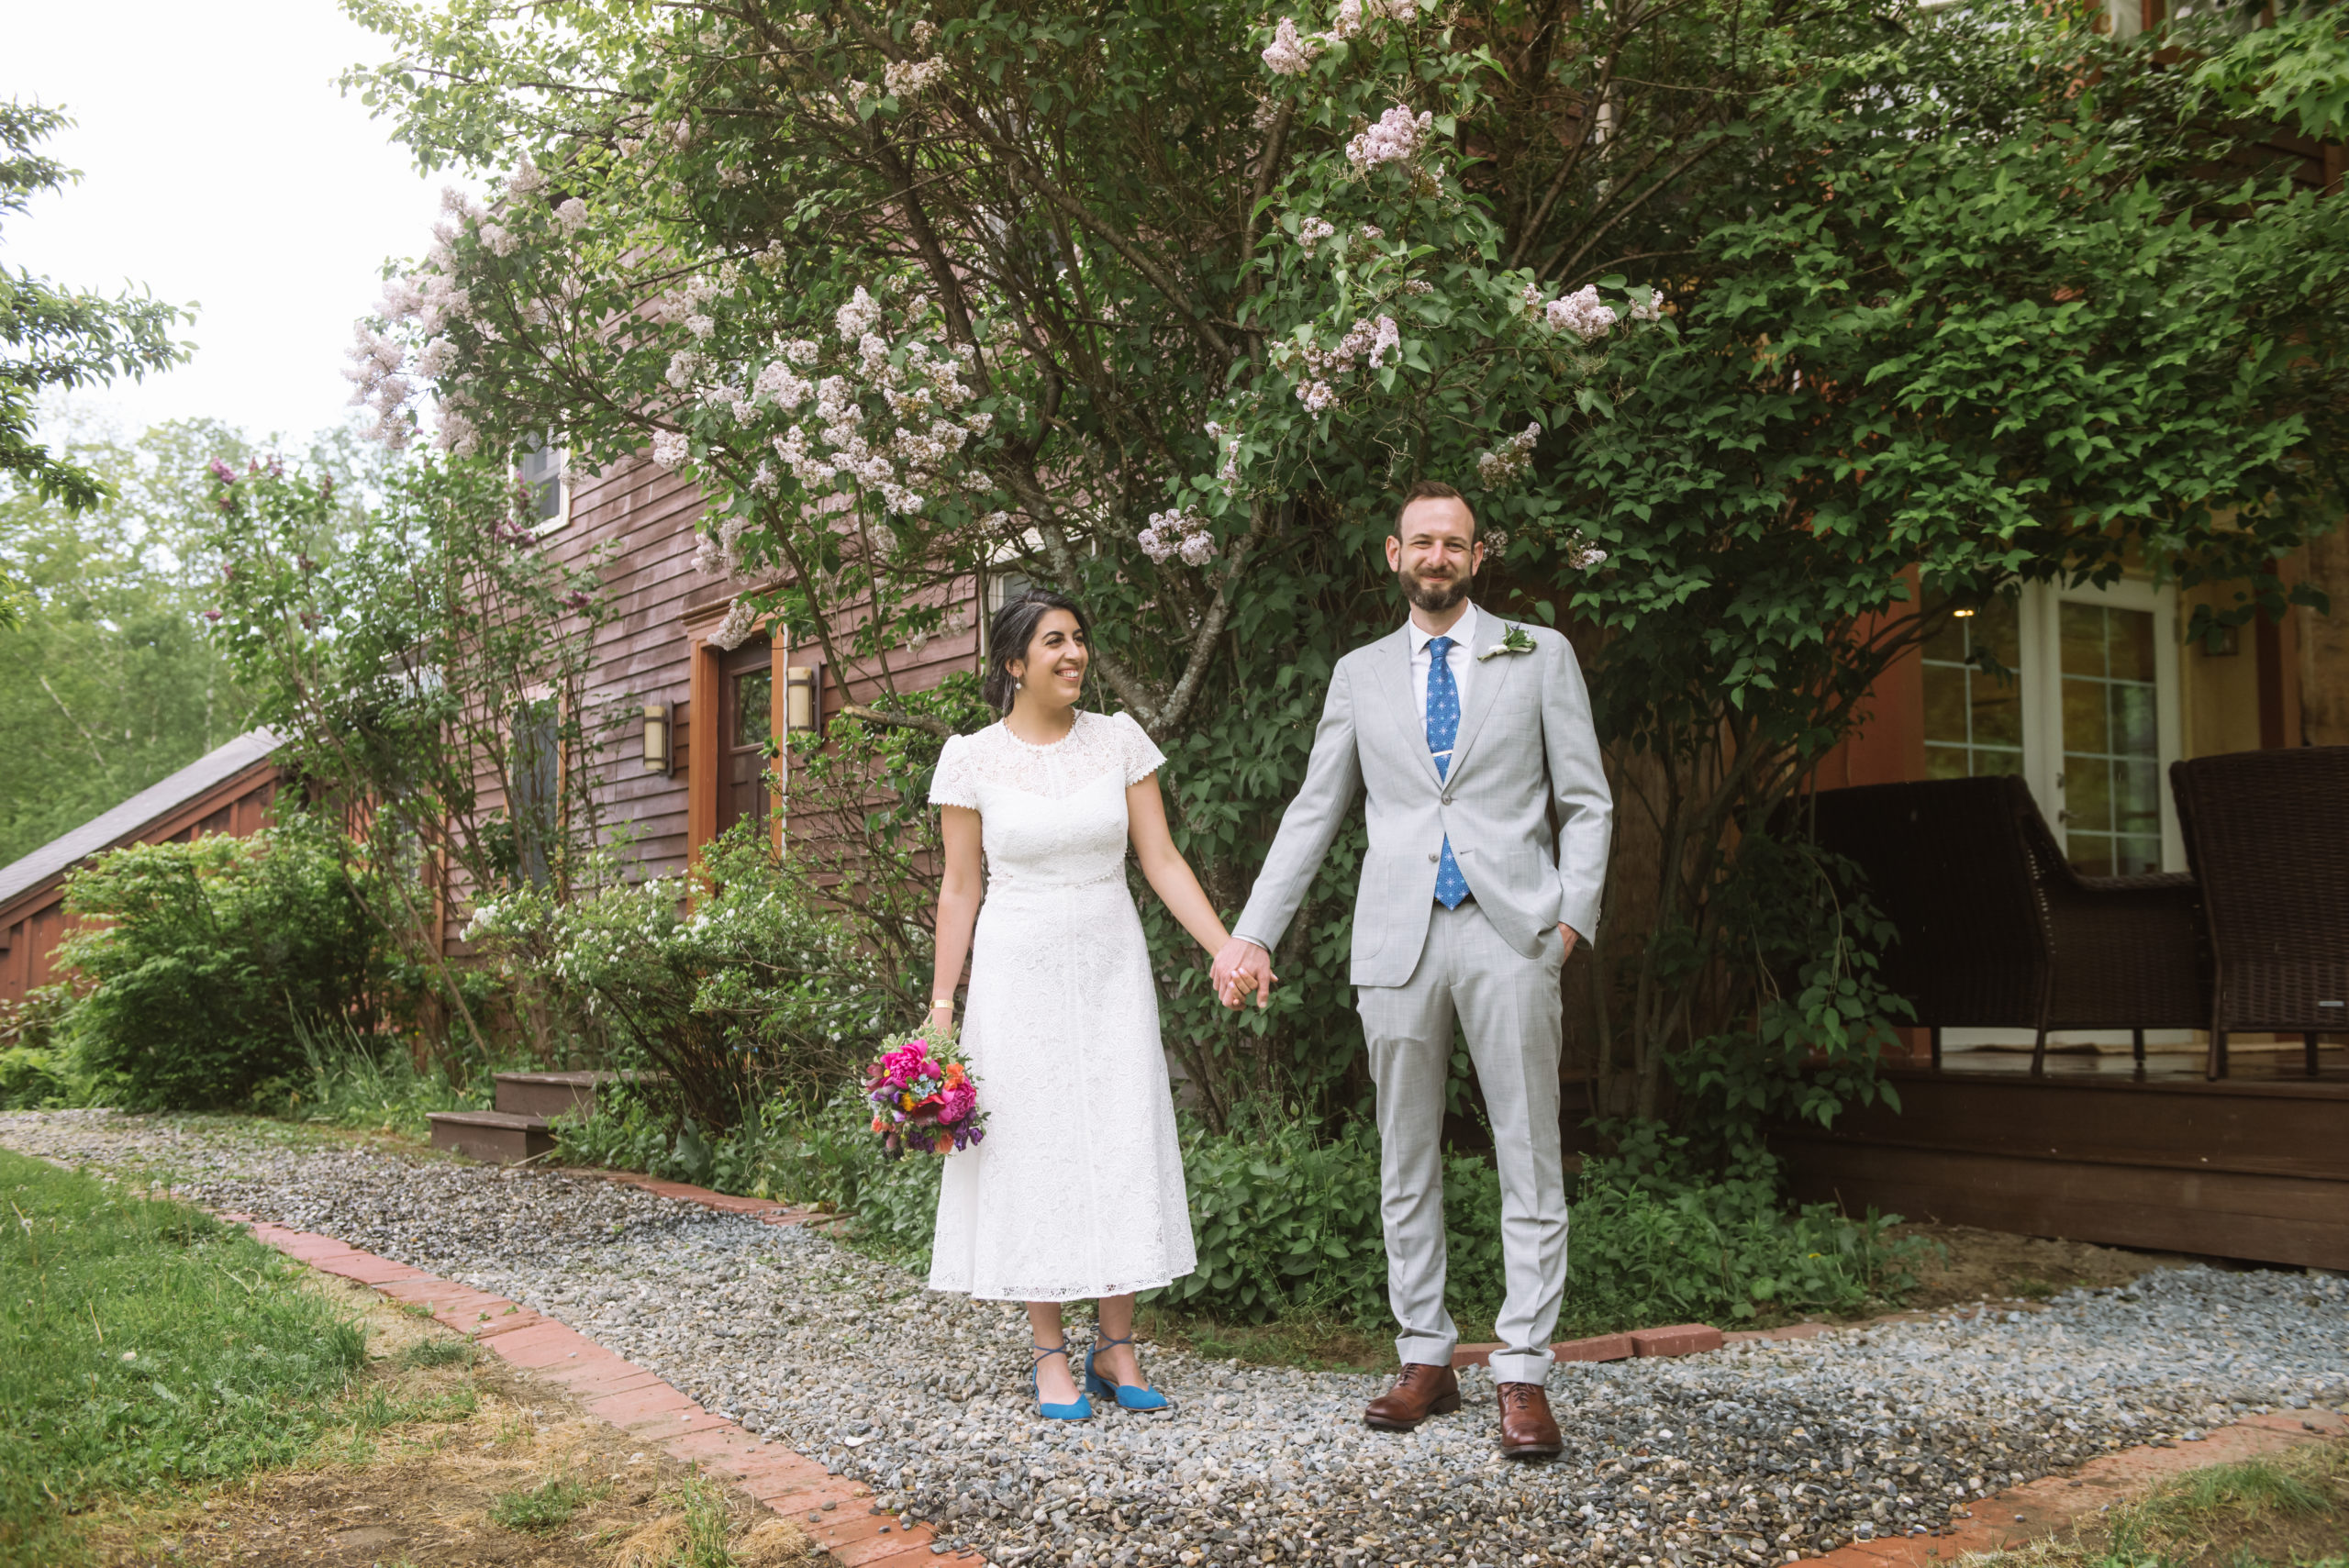 Bride and groom standing apart, holding hands while one is smiling and looking directly to camera and the other is smiling and looking to her groom. Bride is in a white dress and blue shoes, holding a multi-colored pink/purple bouquet. The groom is wearing a light grey suit, blue patterned tie, gold tie clip, white collared shirt, and a boutonniere. They are standing in front of a dark red wood house's front door with greenery and trees surrounding the facade.